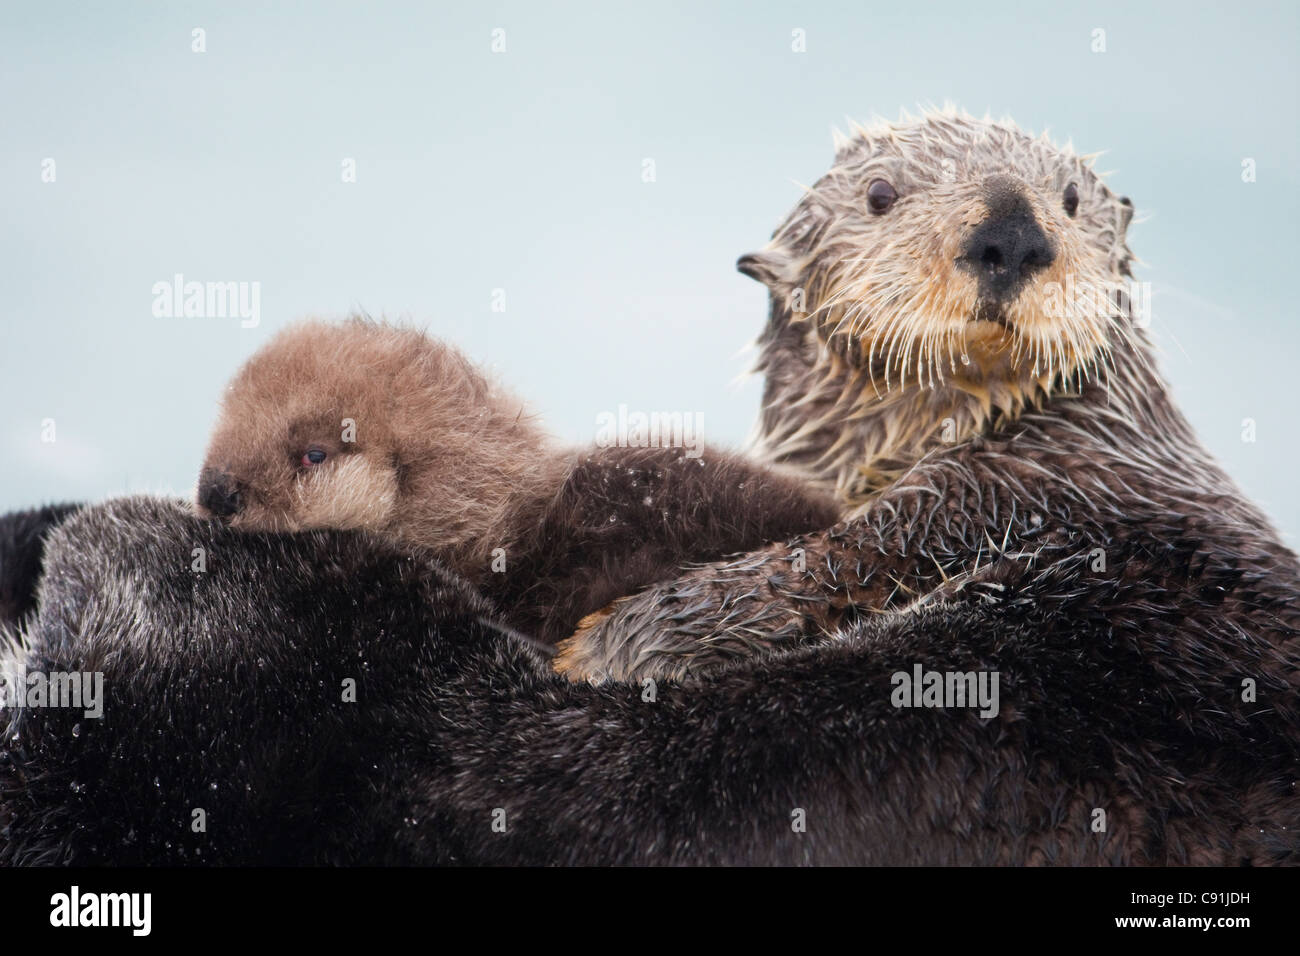 Sea otter with snow covering fur holding newborn pup, Prince William Sound, Southcentral Alaska, Winter Stock Photo